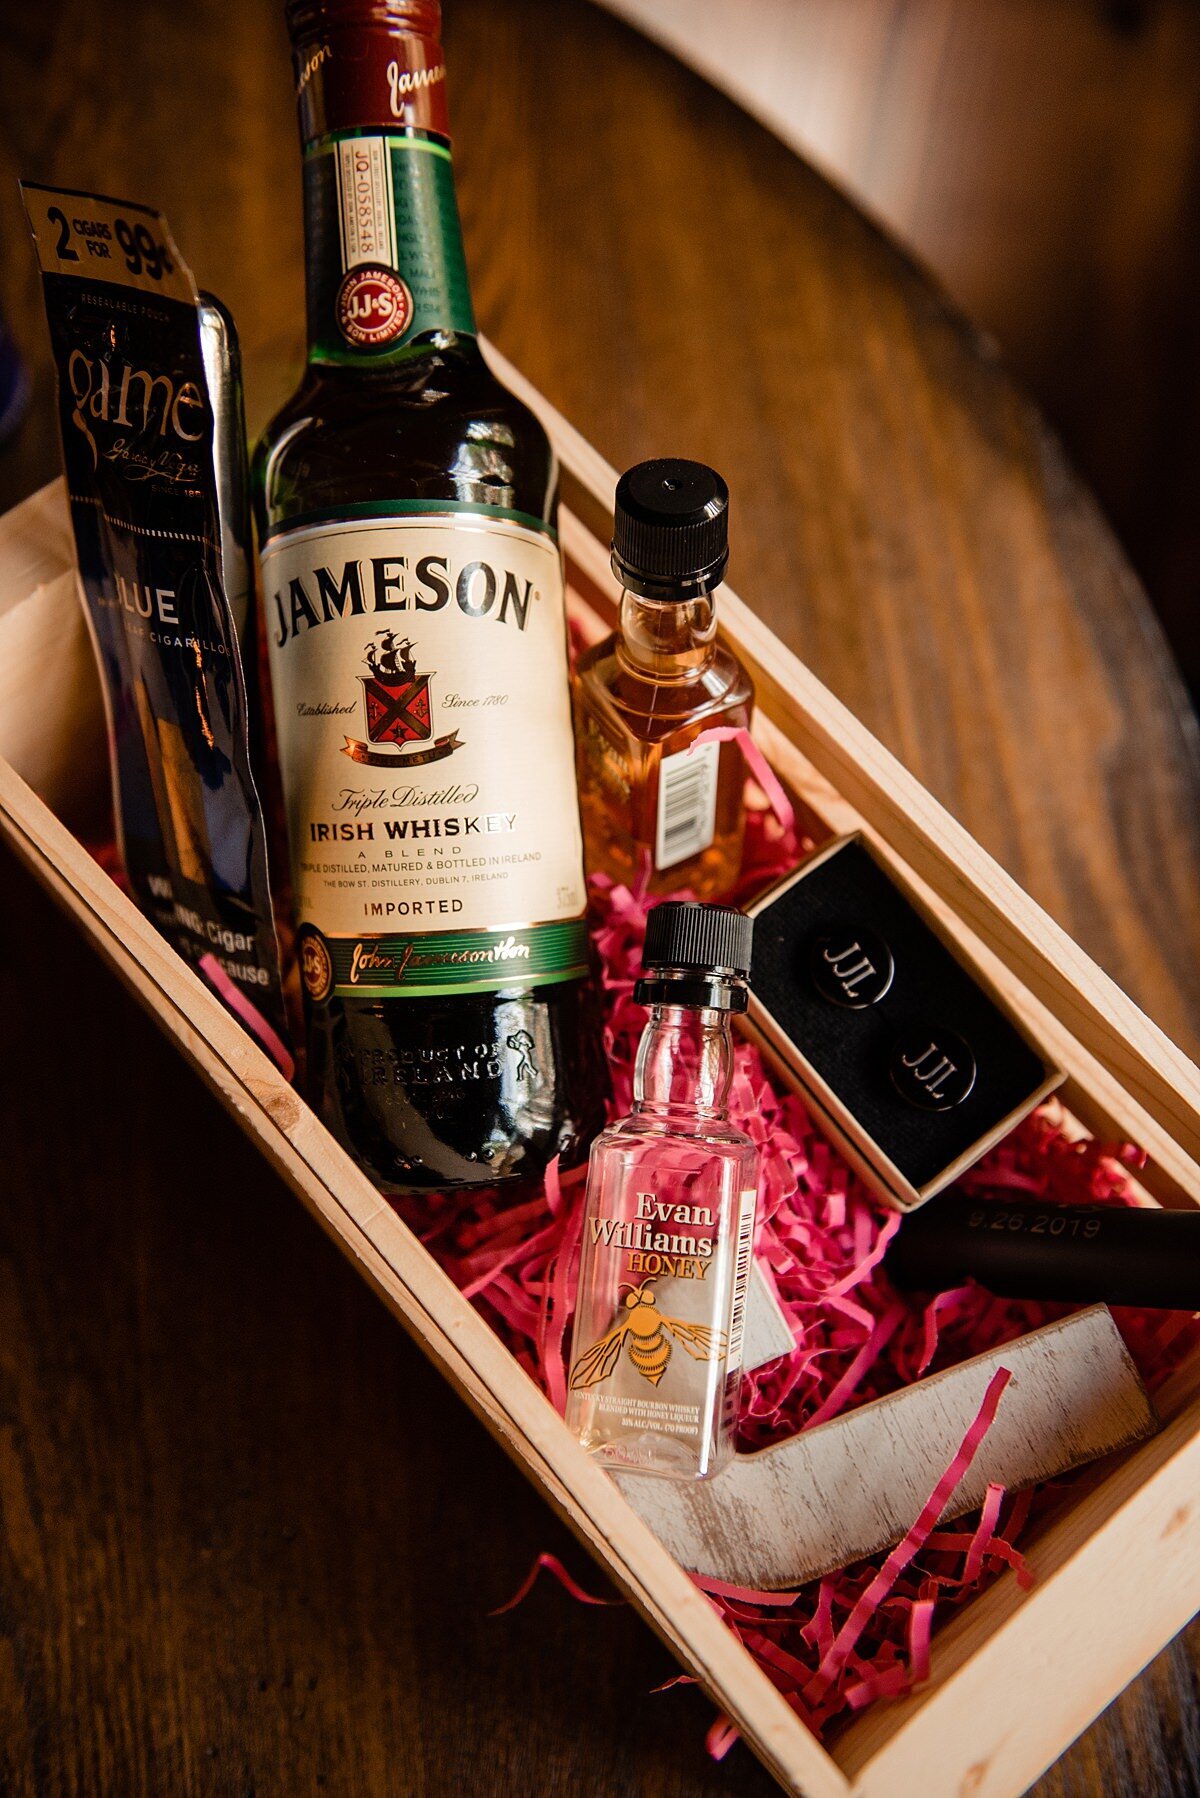 A gift basket for groomsmen with Irish Whisky, cufflinks and other items on a bed or red shredded paper in a wooden box.